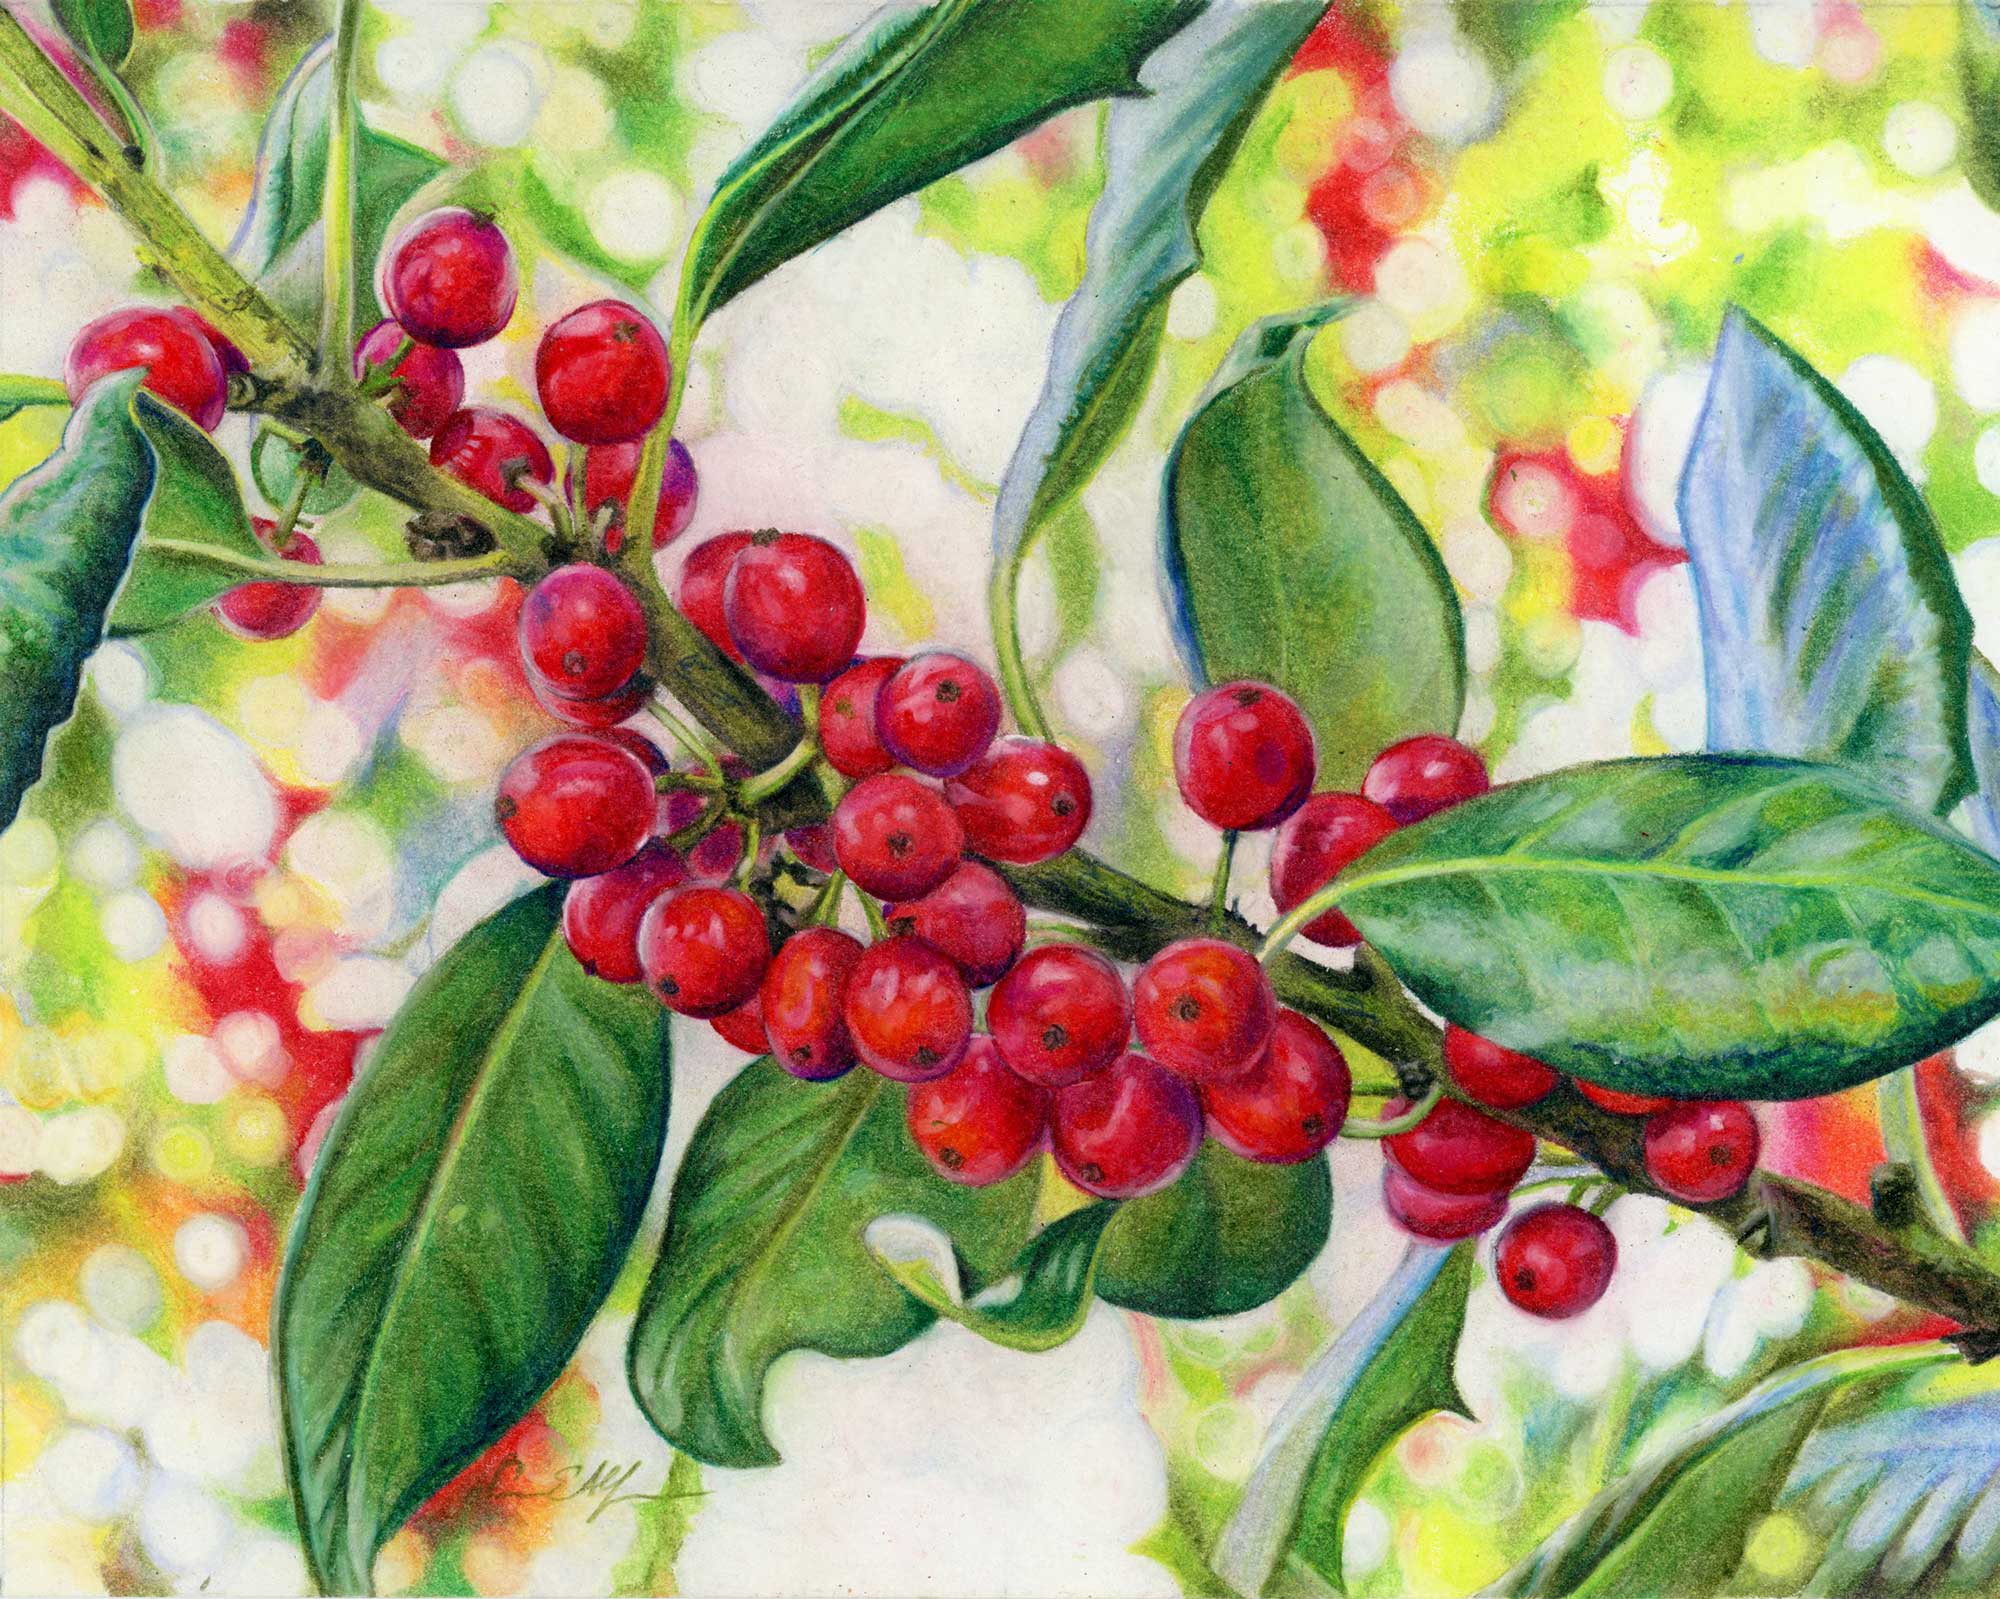 "Jolly Holly", 8" x 10", colored pencil